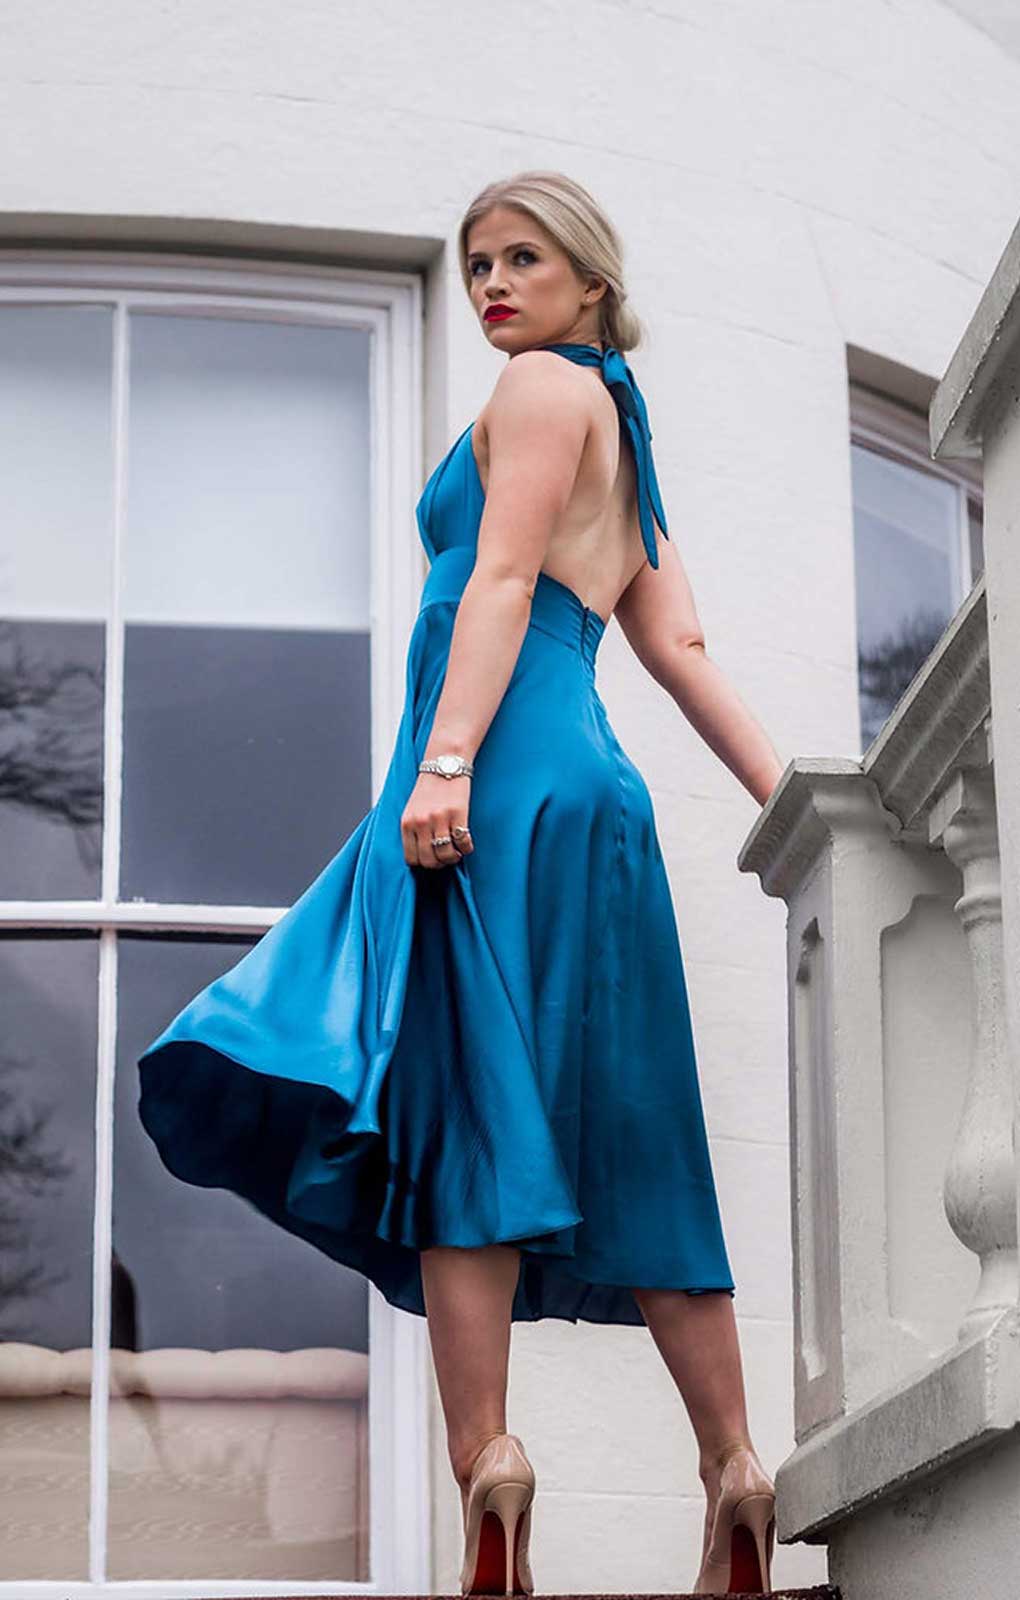 House of Zana Marilyn in Teal Dress product image